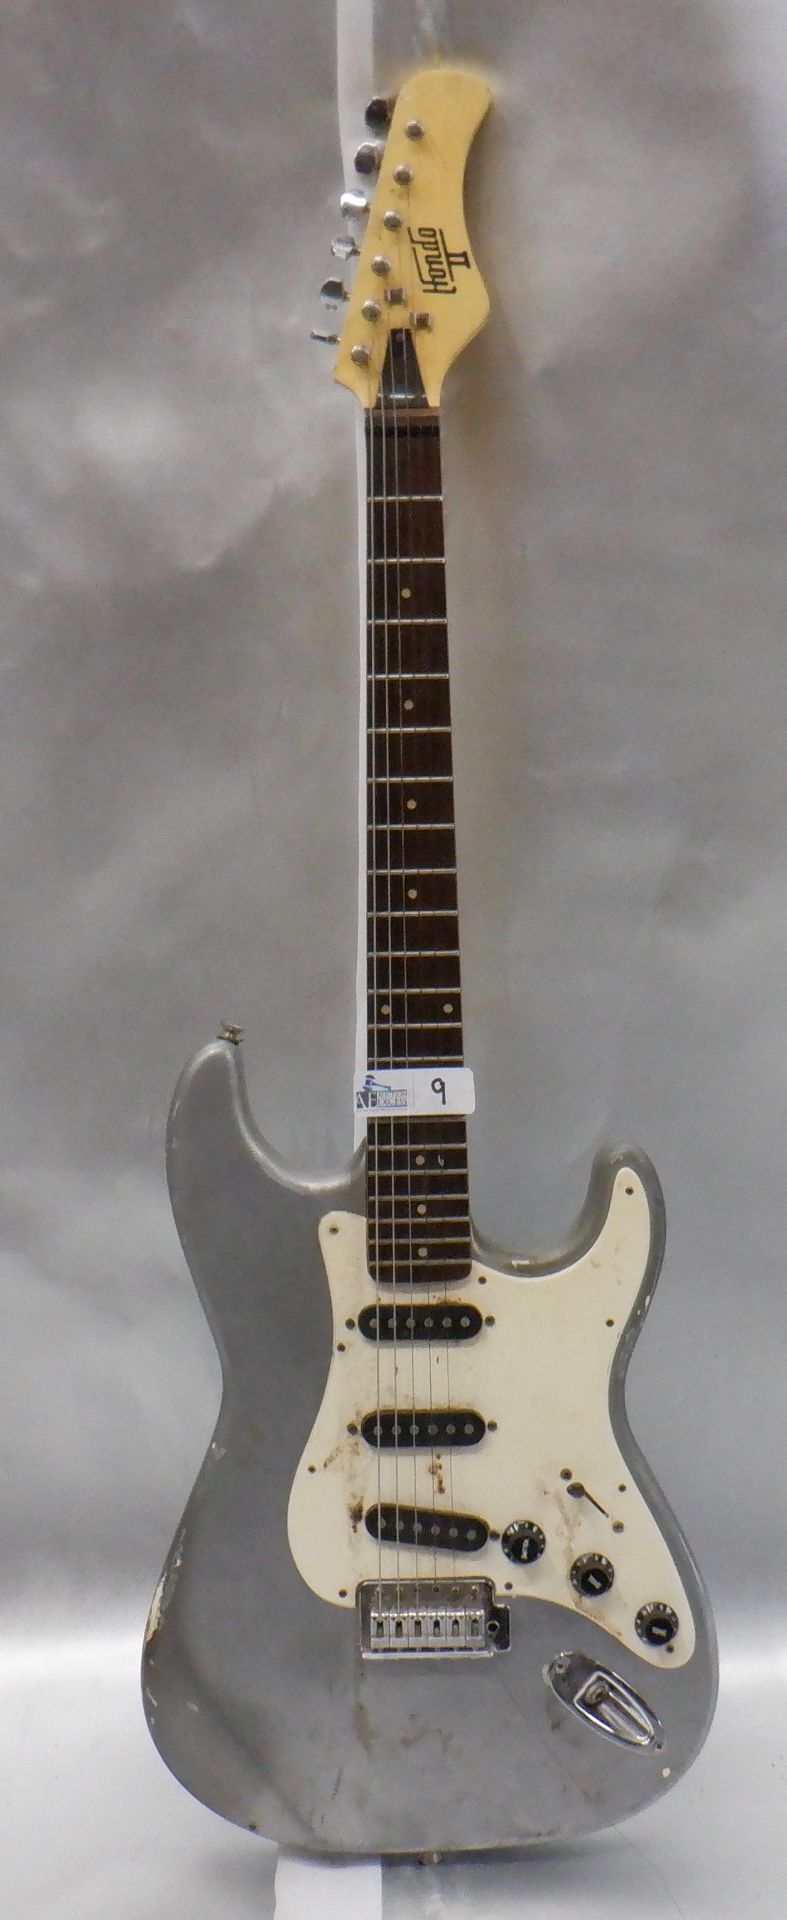 HONDO II STRAT GUITAR WITH SOFT CASE - Image 2 of 7